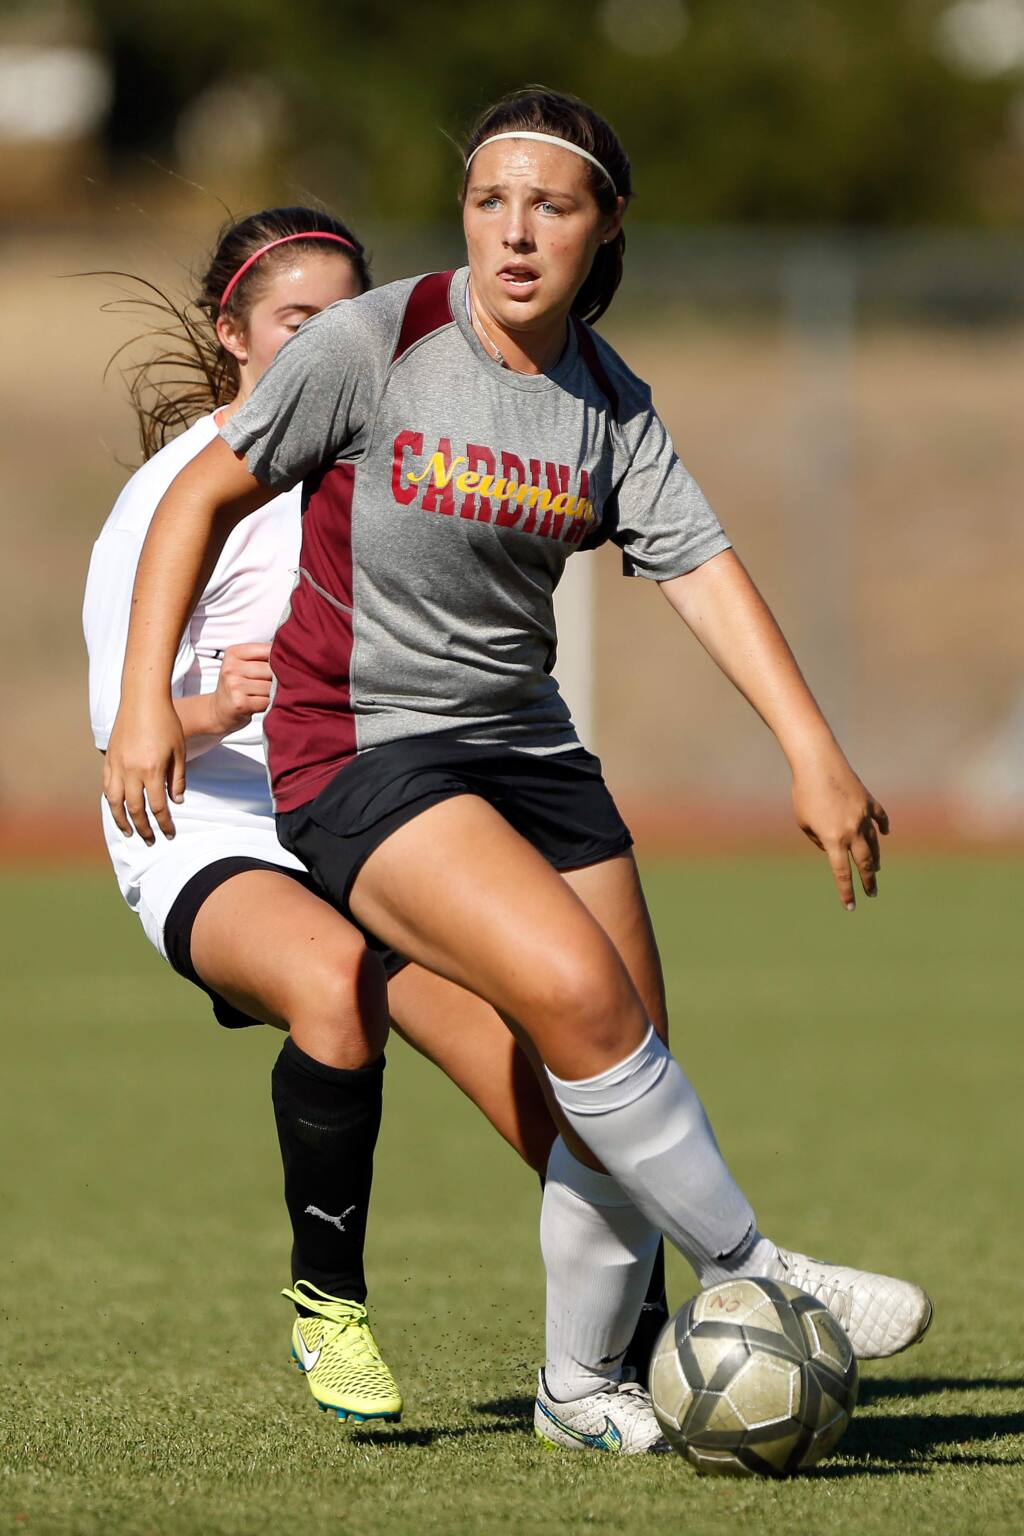 Cardinal Newman's Dani Gilson looks to pass to an open teammate during a girls varsity soccer scrimmage match between Windsor and Cardinal Newman high schools, in Santa Rosa, California on Wednesday, August 31, 2016. (Alvin Jornada / The Press Democrat)